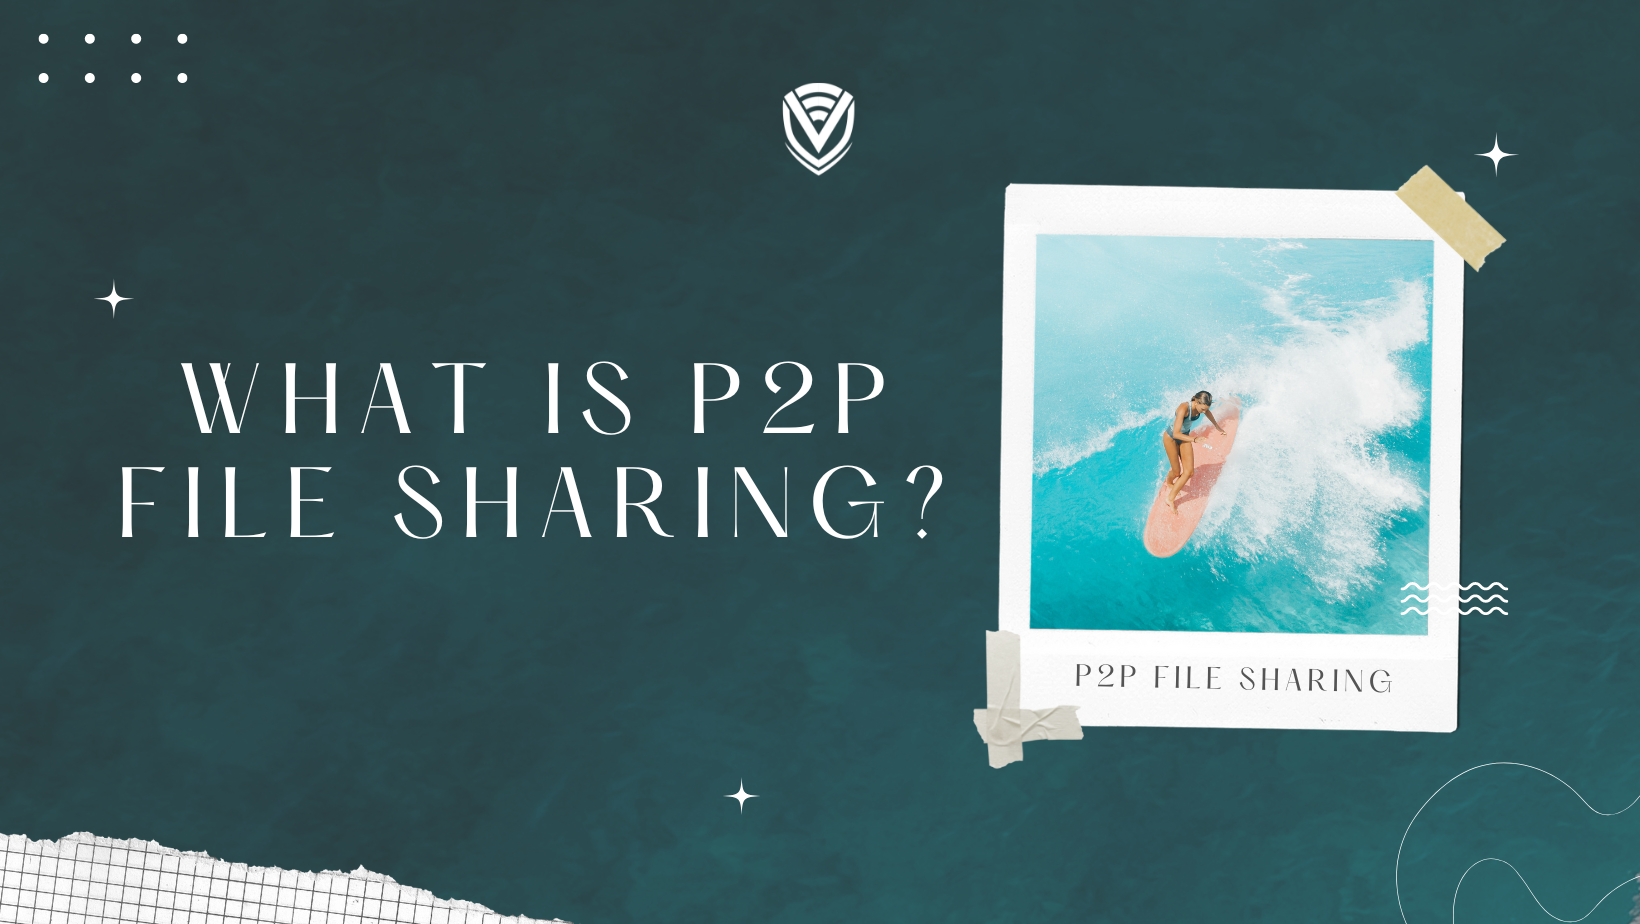 P2P File Sharing: What it is and what it’s for